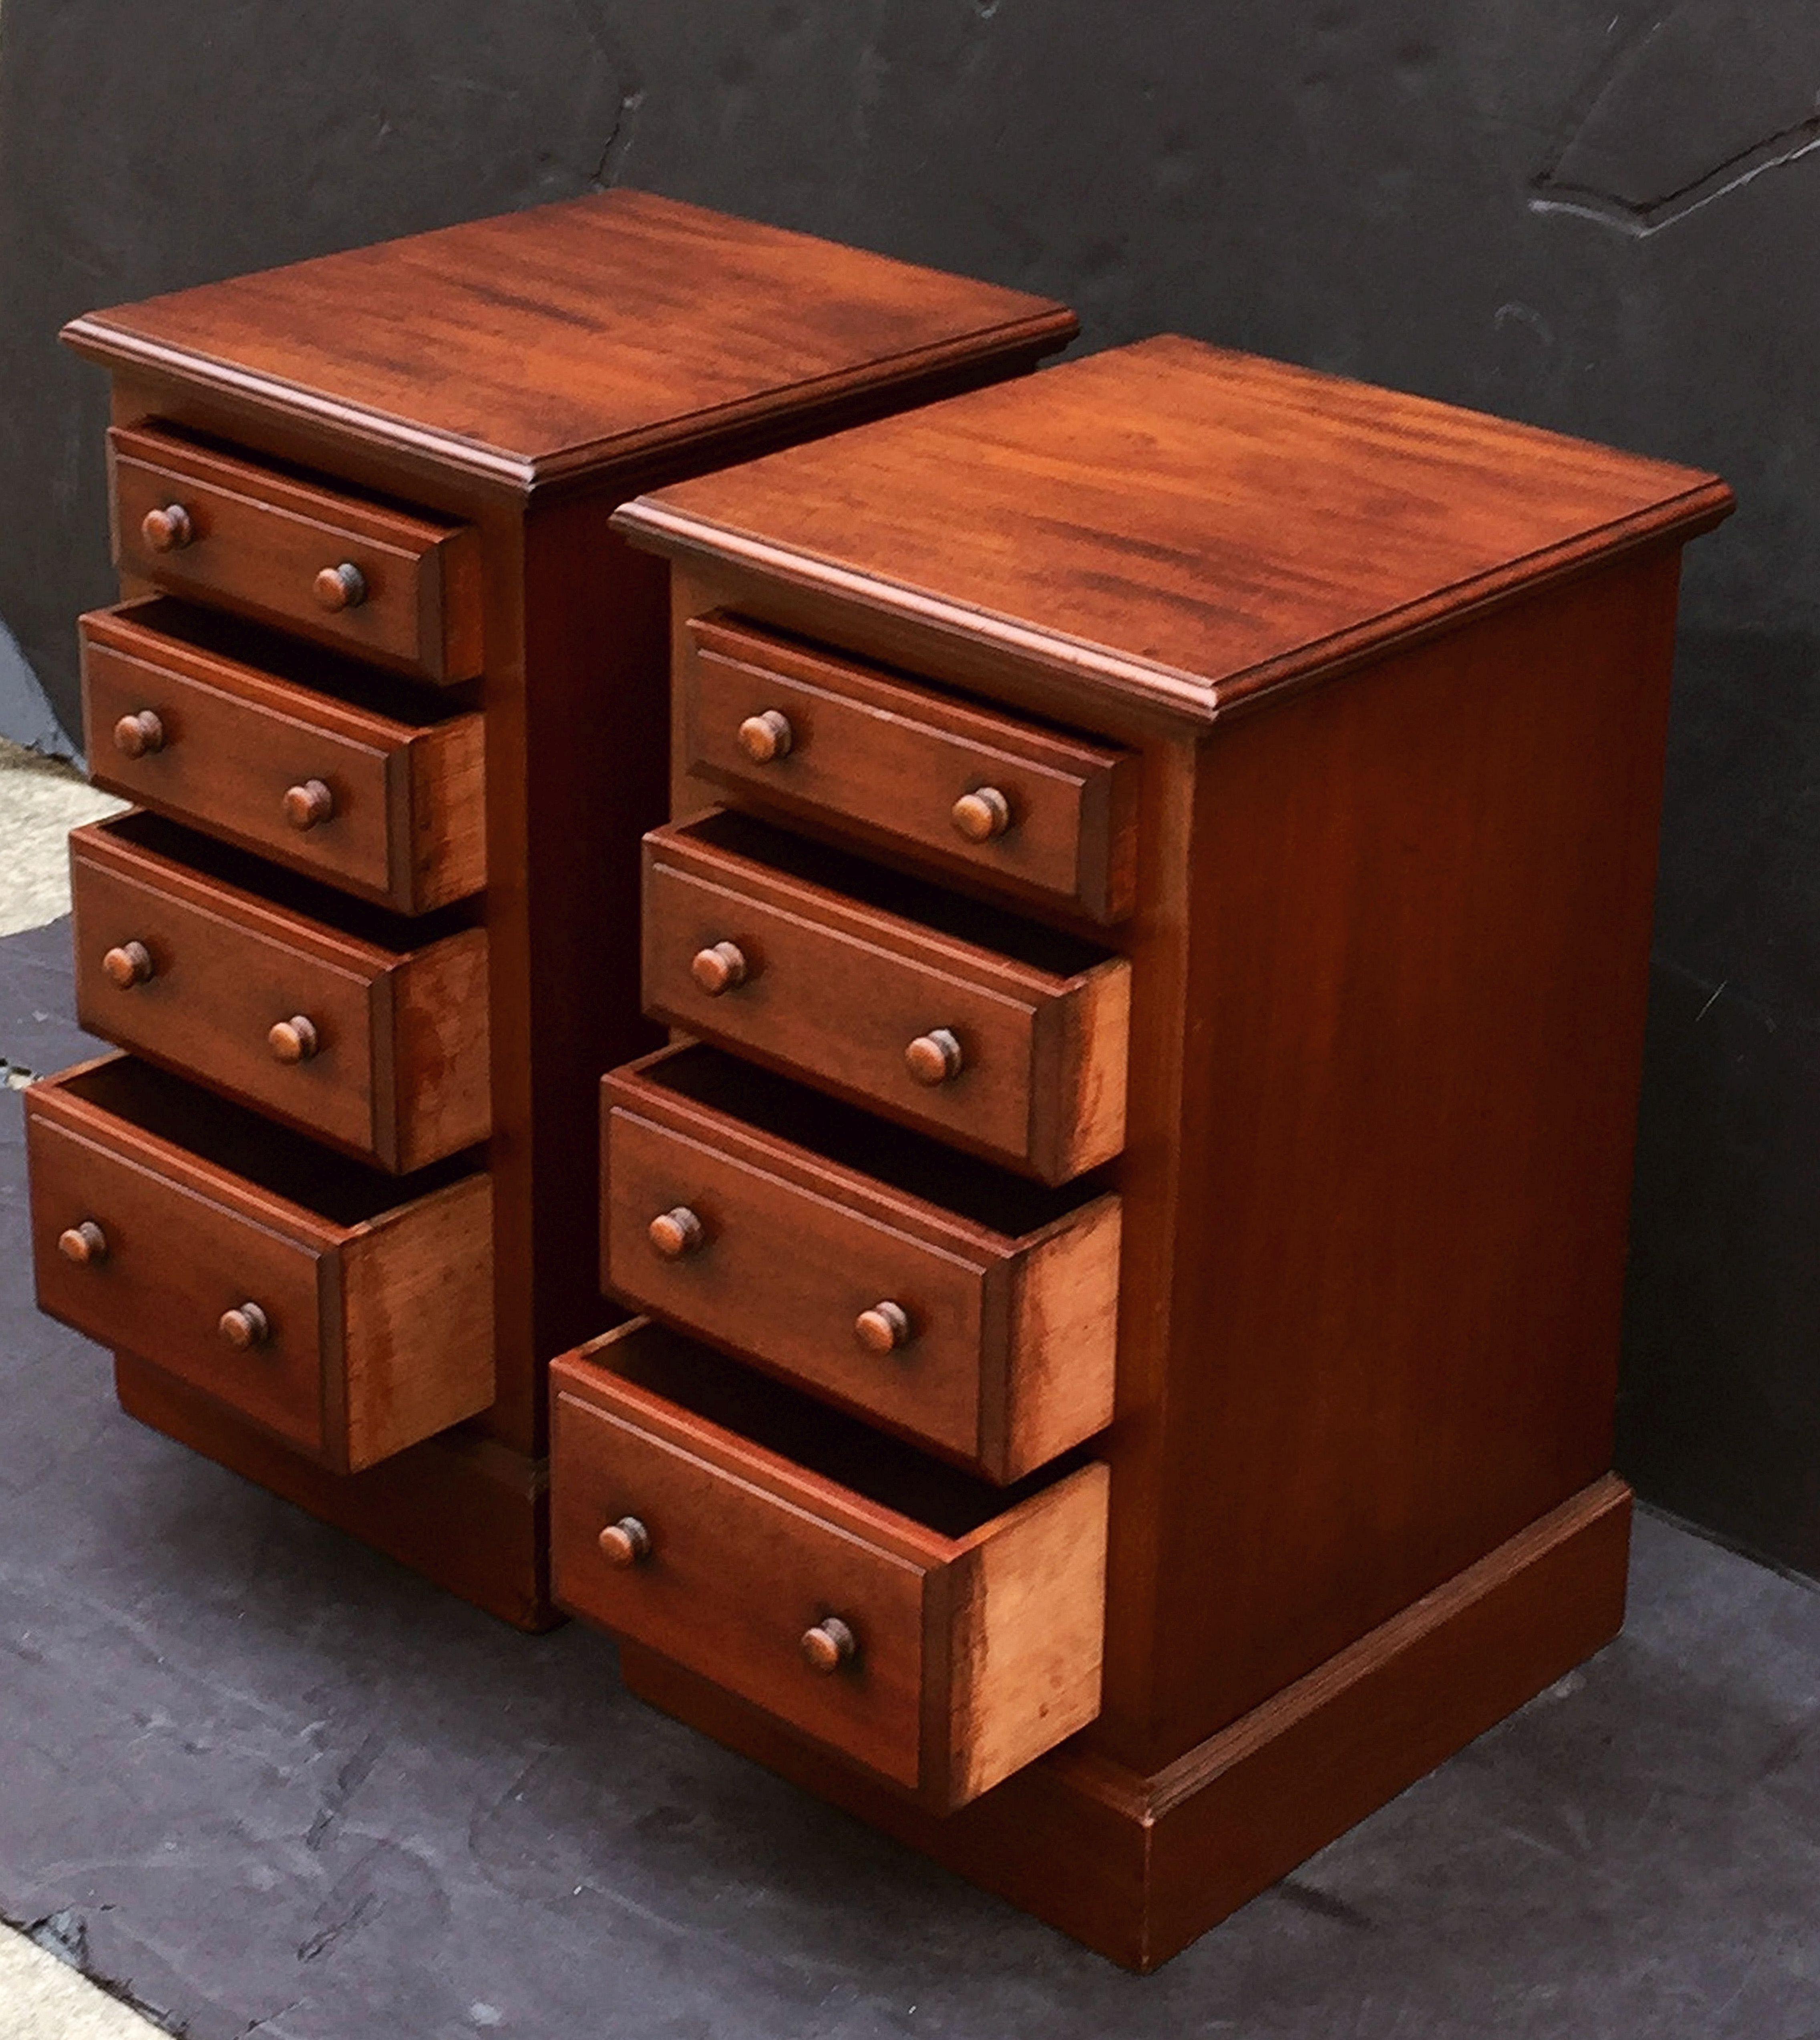 English Bedside Chests or Cabinet Nightstands of Mahogany - 'Priced as a Pair' 3